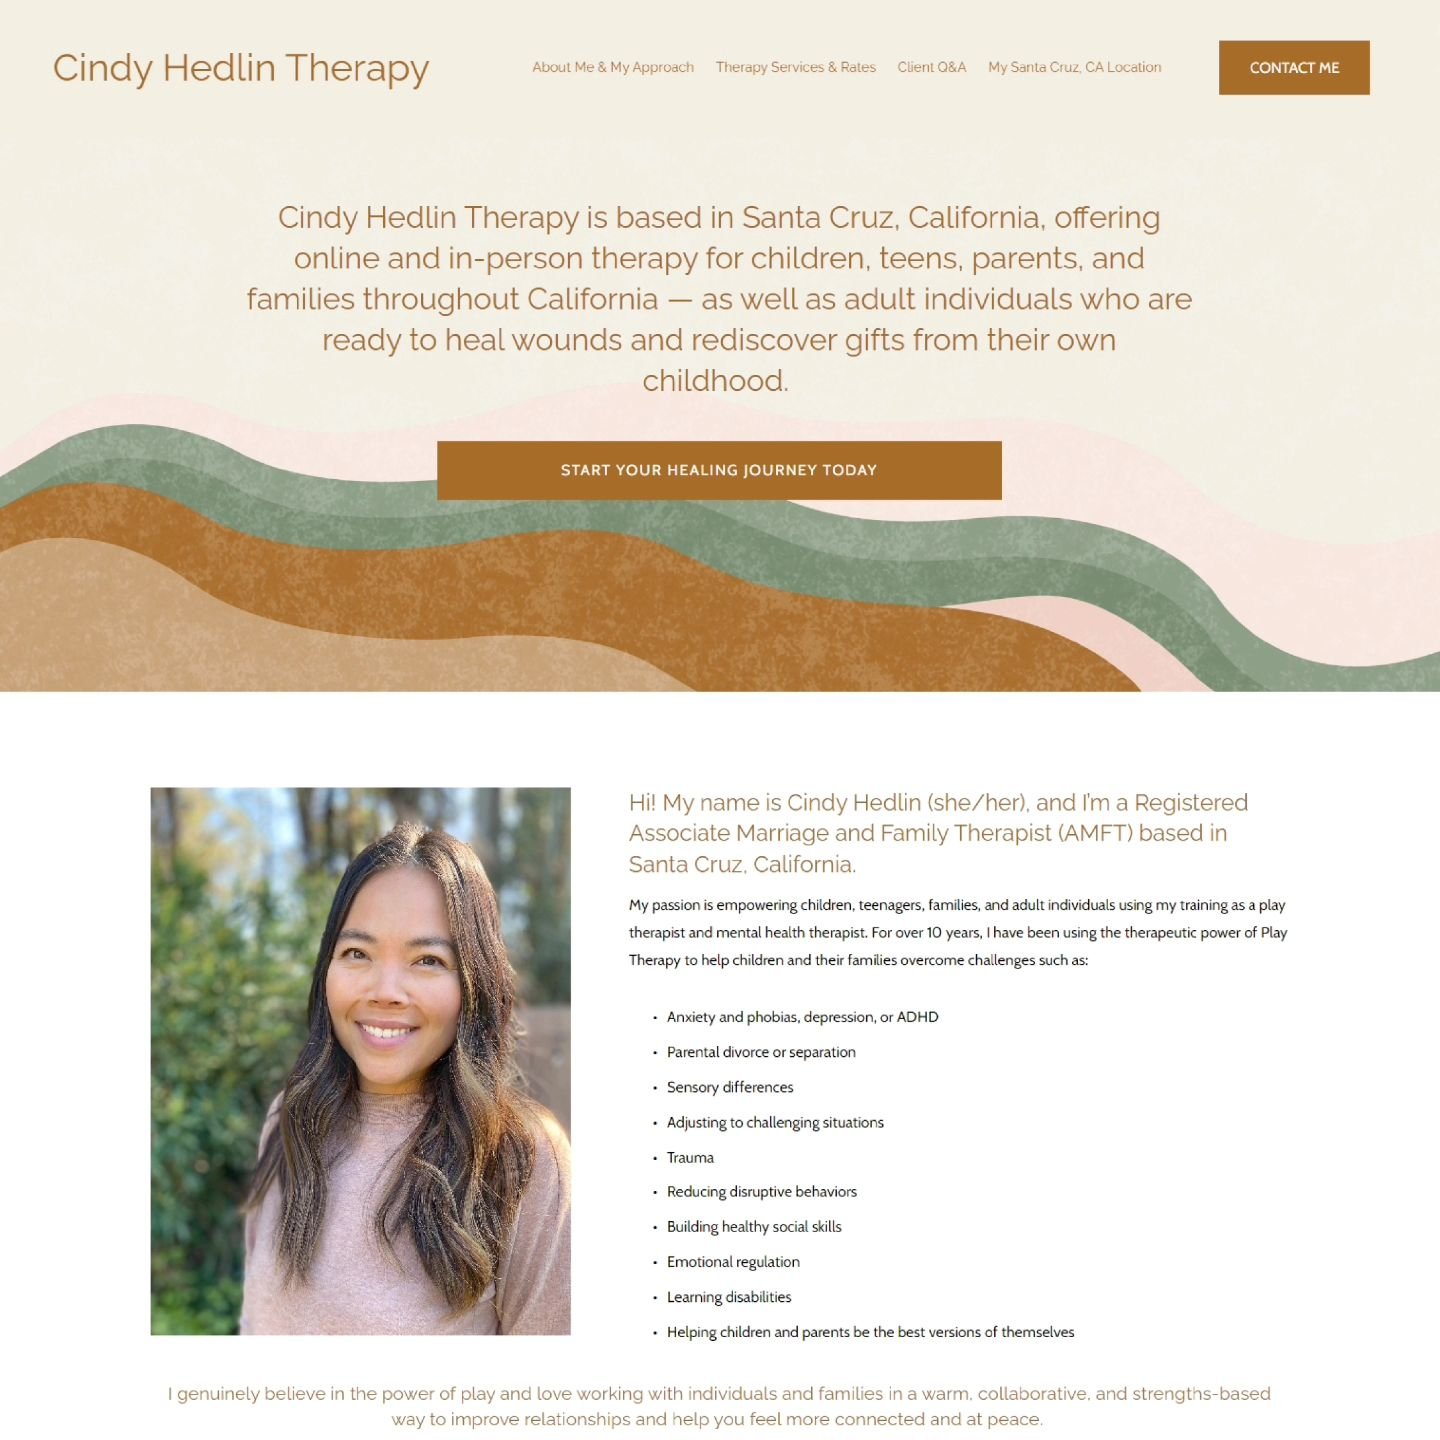 Cindy and I recently worked together on website design for her new practice! Cindy provides therapy for children, teens, parents - and adults healing their inner child. 

Cindy knew she wanted her website to have a minimalist, boho feel. As someone